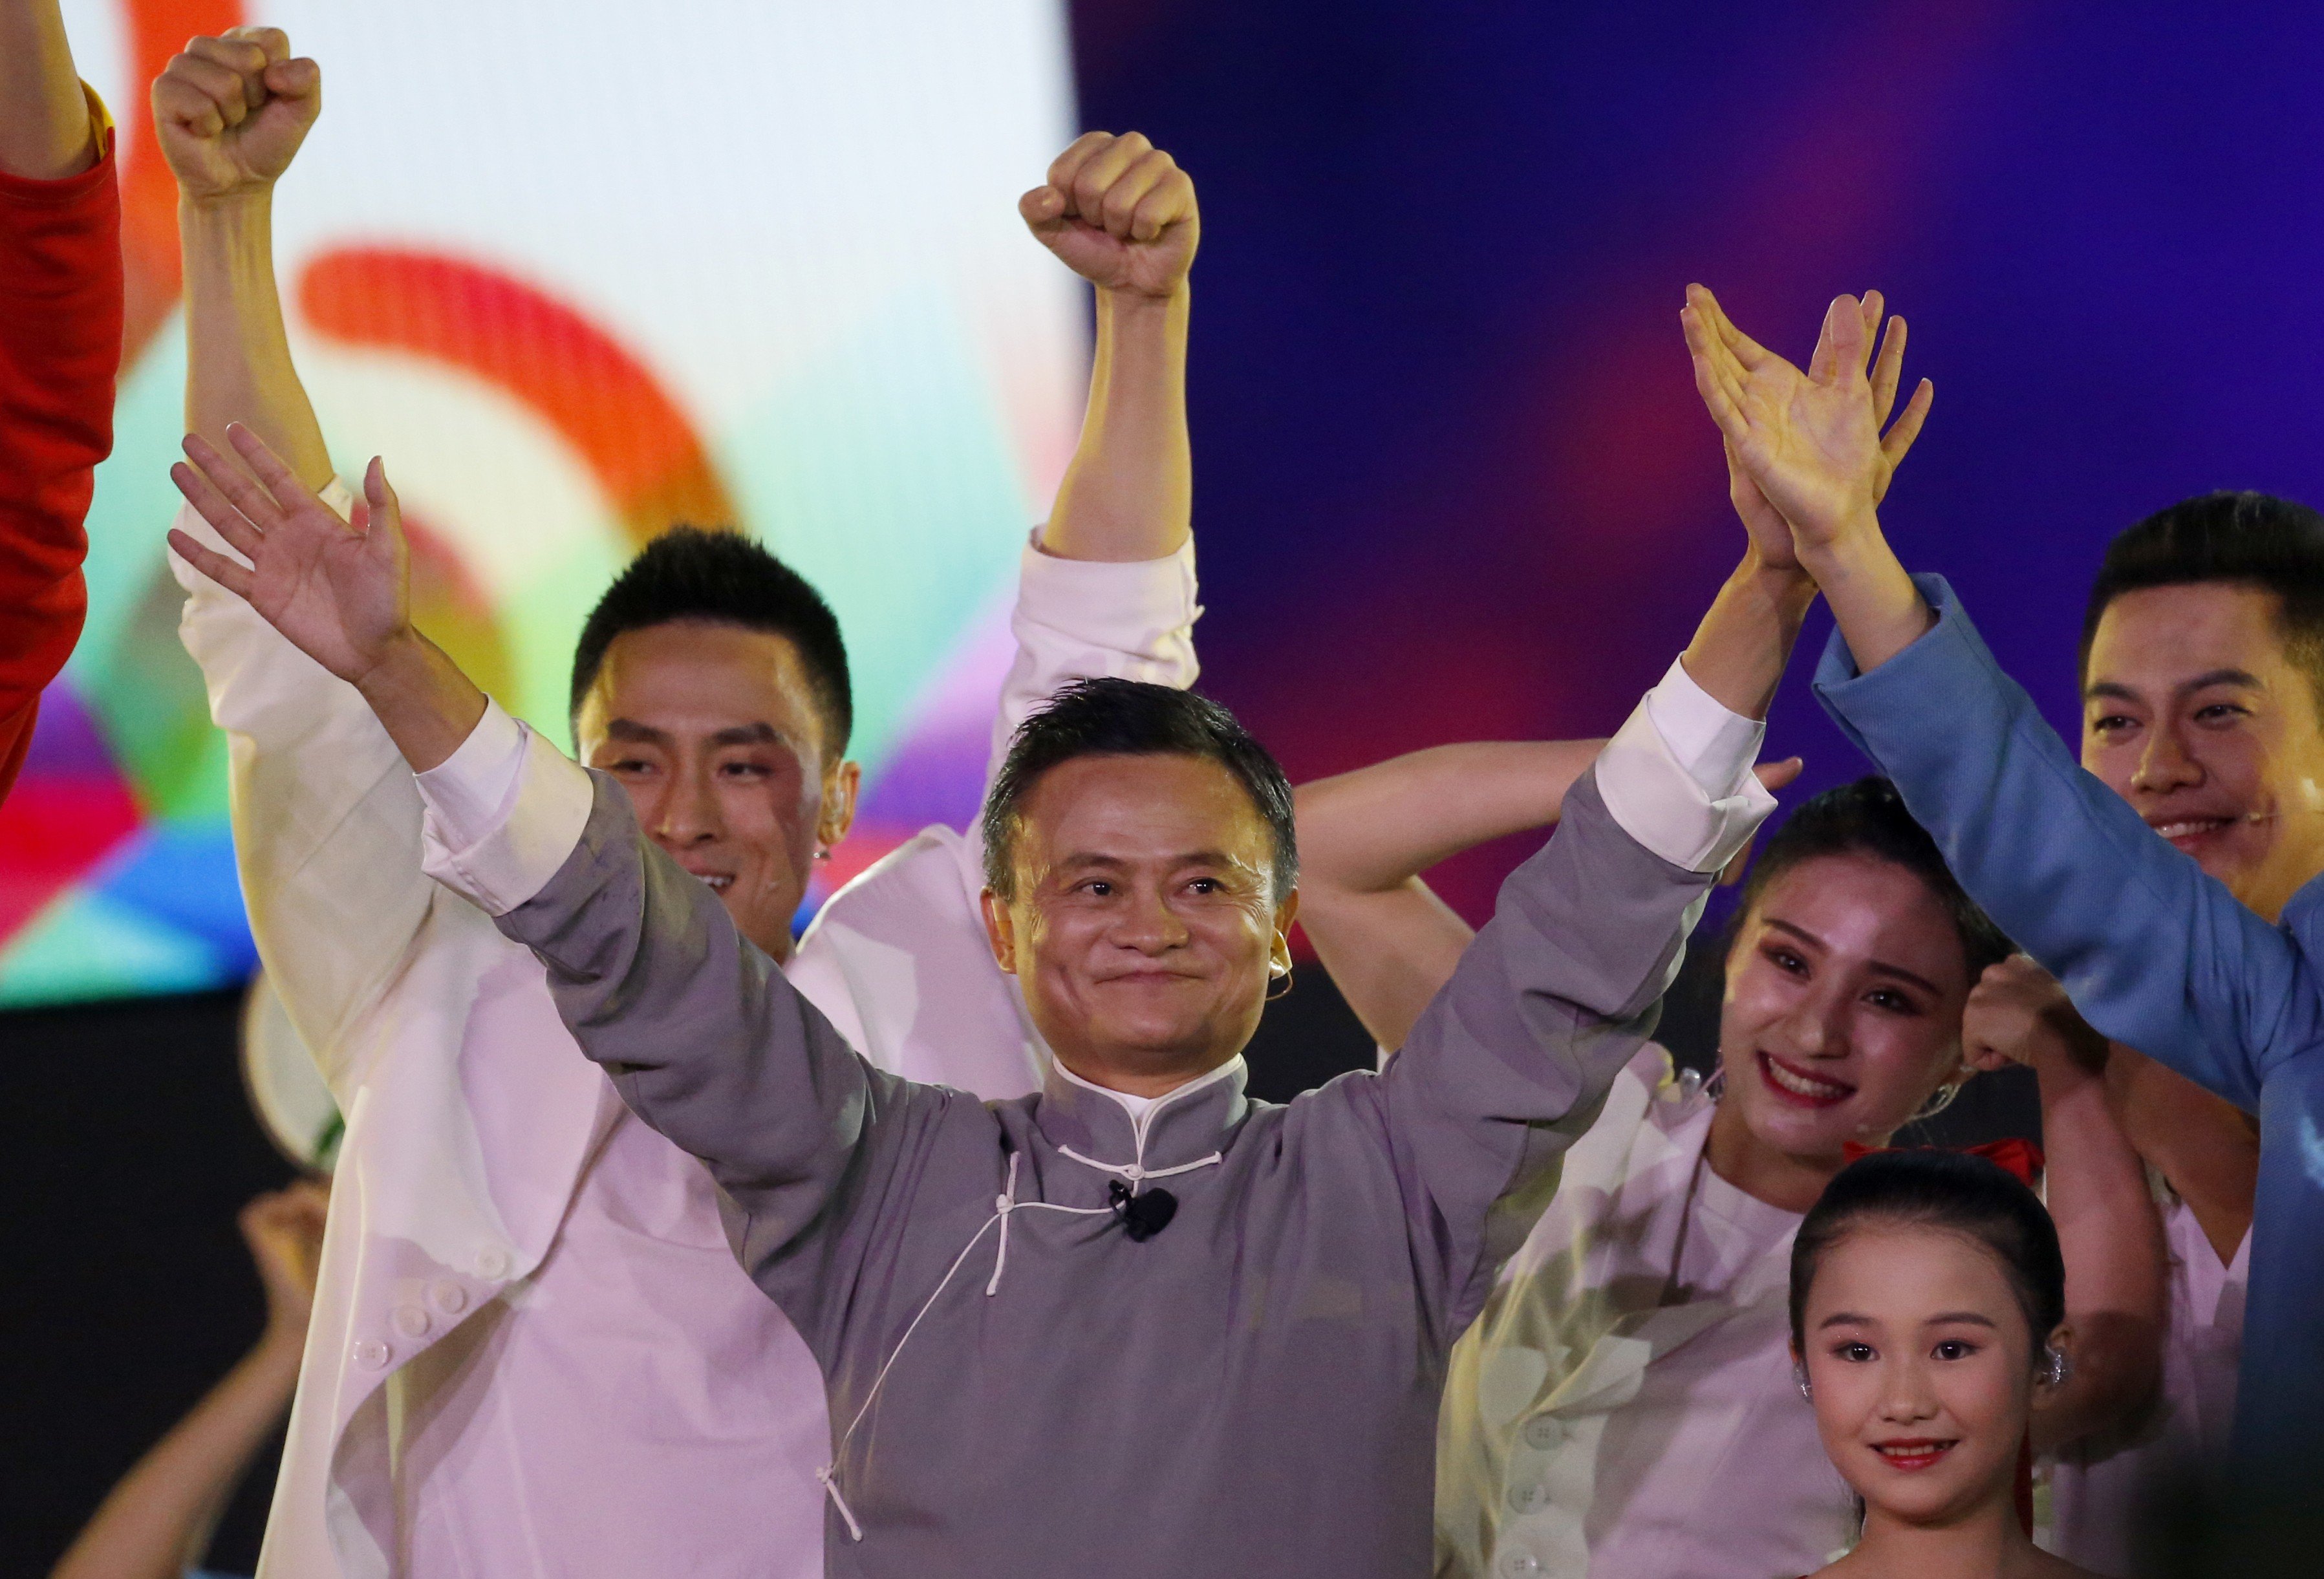 Jack Ma, executive chairman of Alibaba Group, waves to the audience during the closing ceremony for the 18th Asian Games in Jakarta, Indonesia. Photo: AP